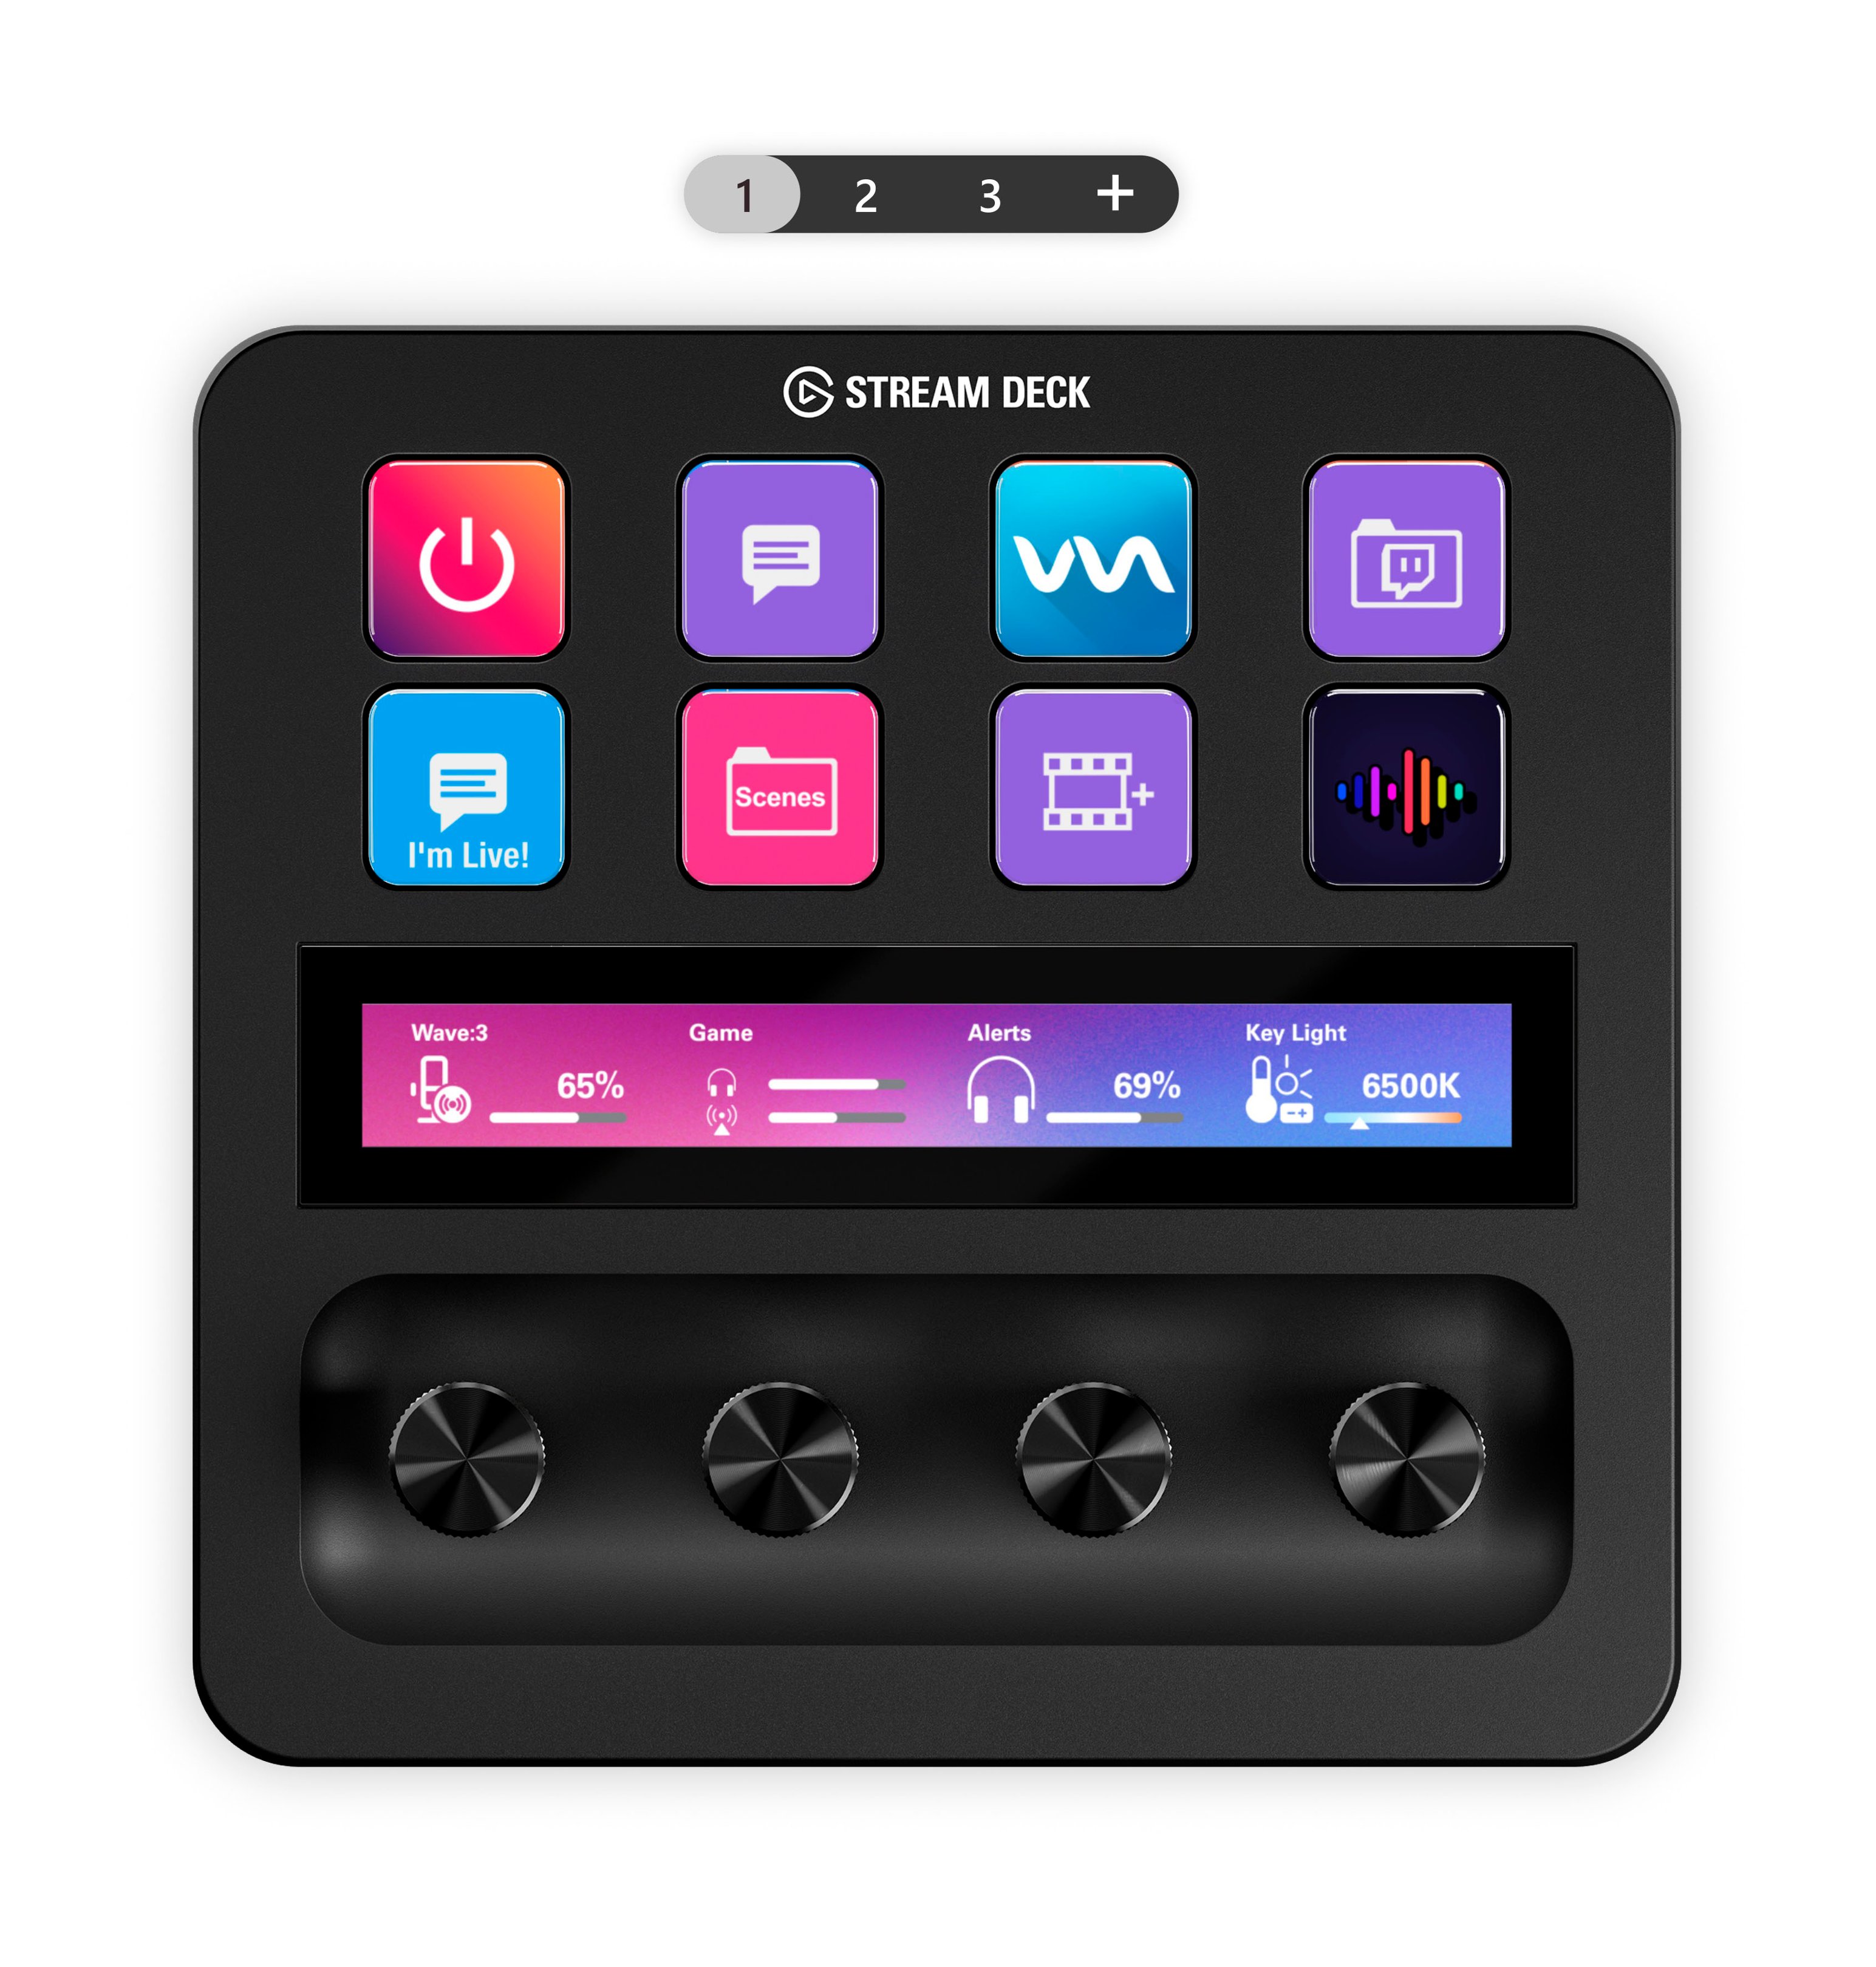 Elgato Stream Deck + Studio Controller with customizable touch strip and  dials Black 10GBD9901 - Best Buy